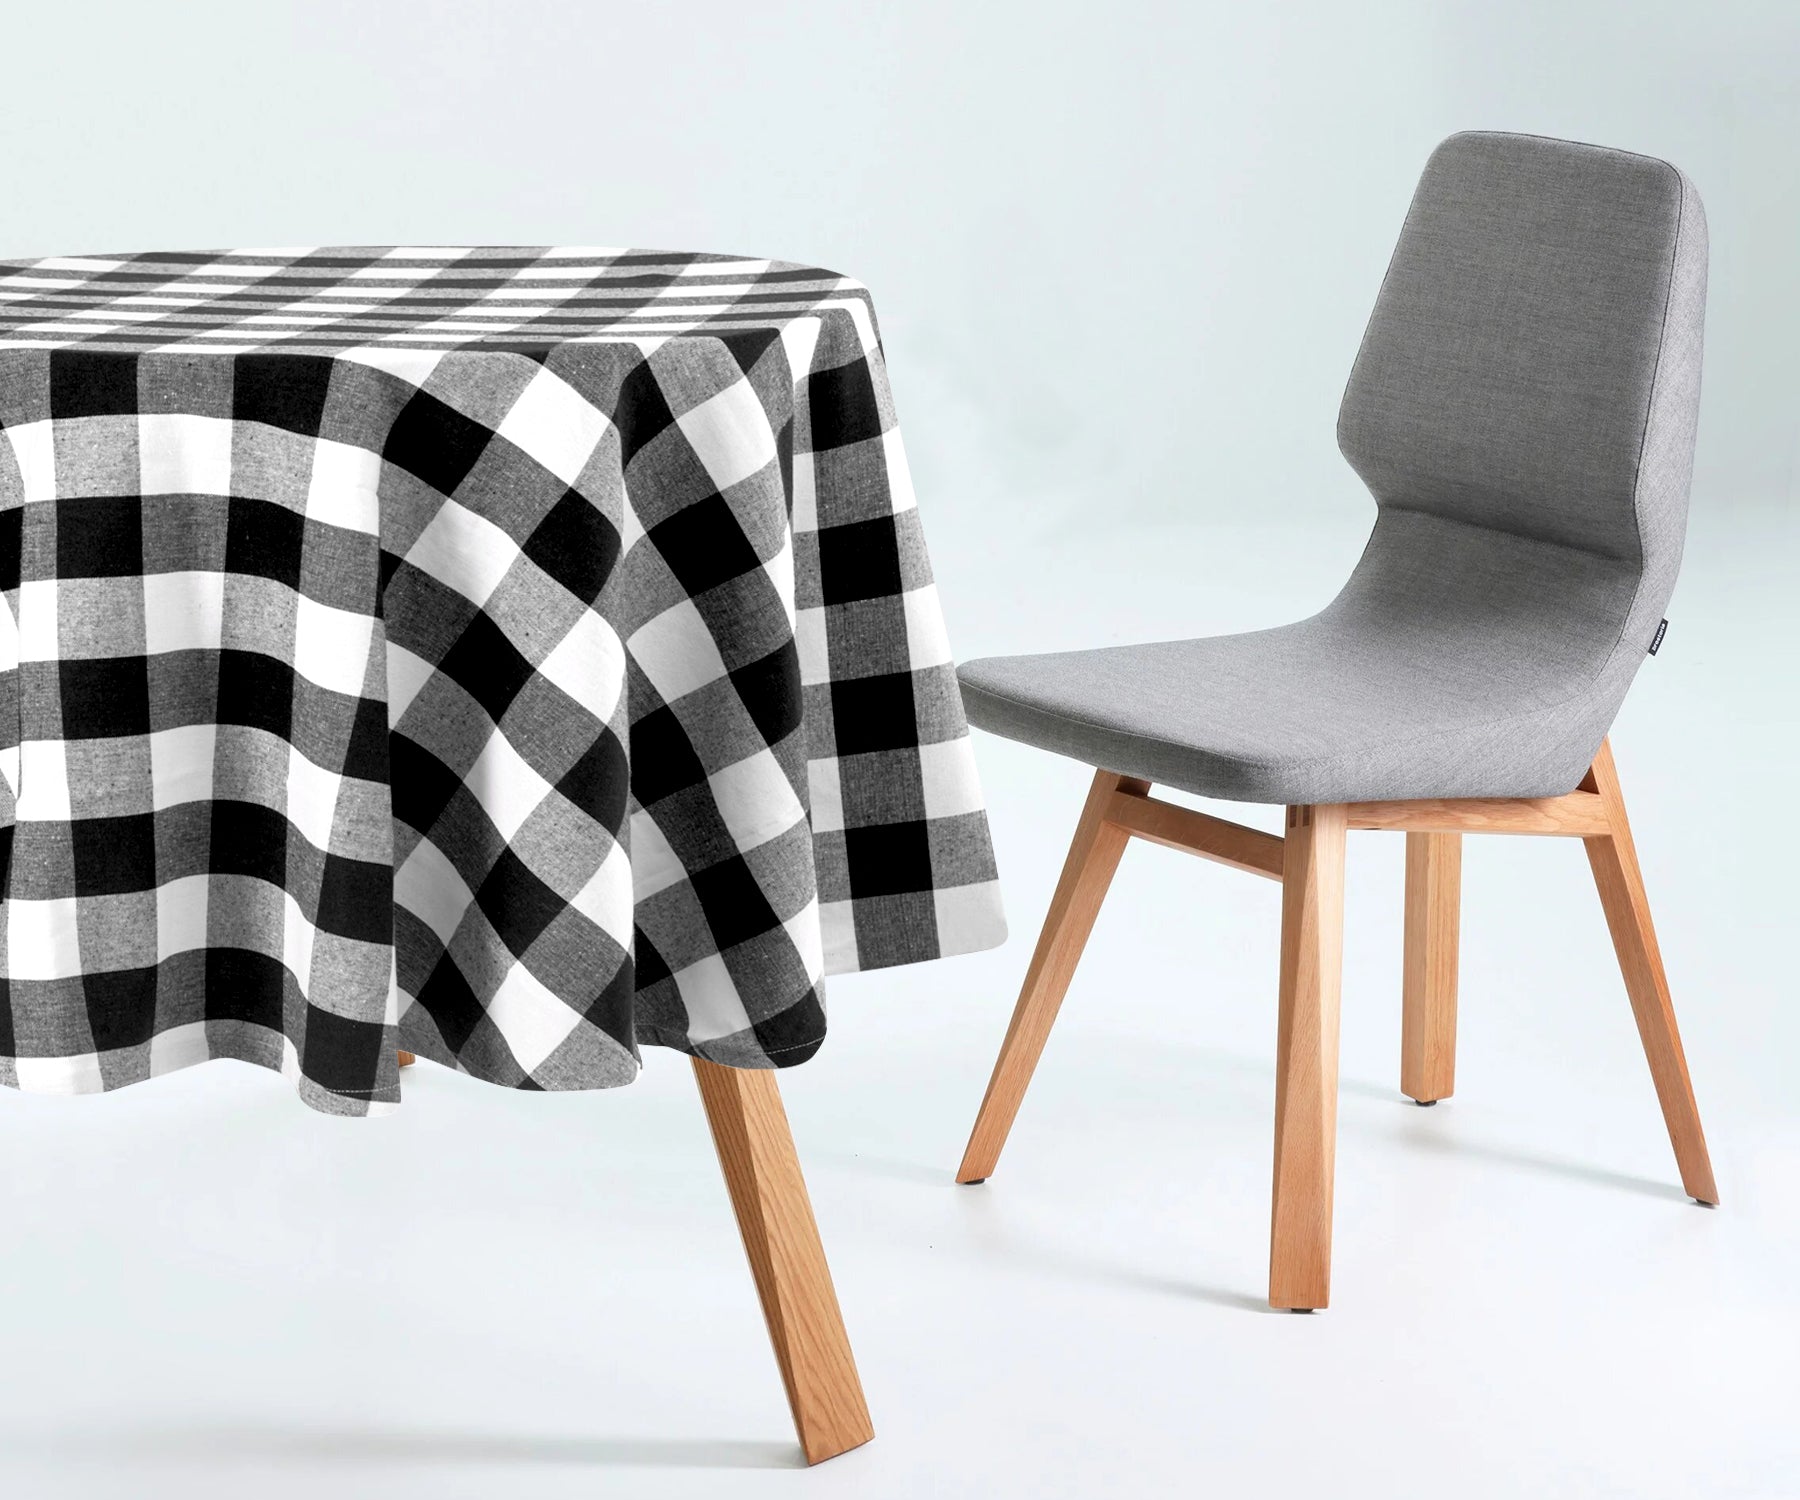 Round plaid tablecloth, with its cozy checkered pattern, sets a relaxed and inviting tone for meals.